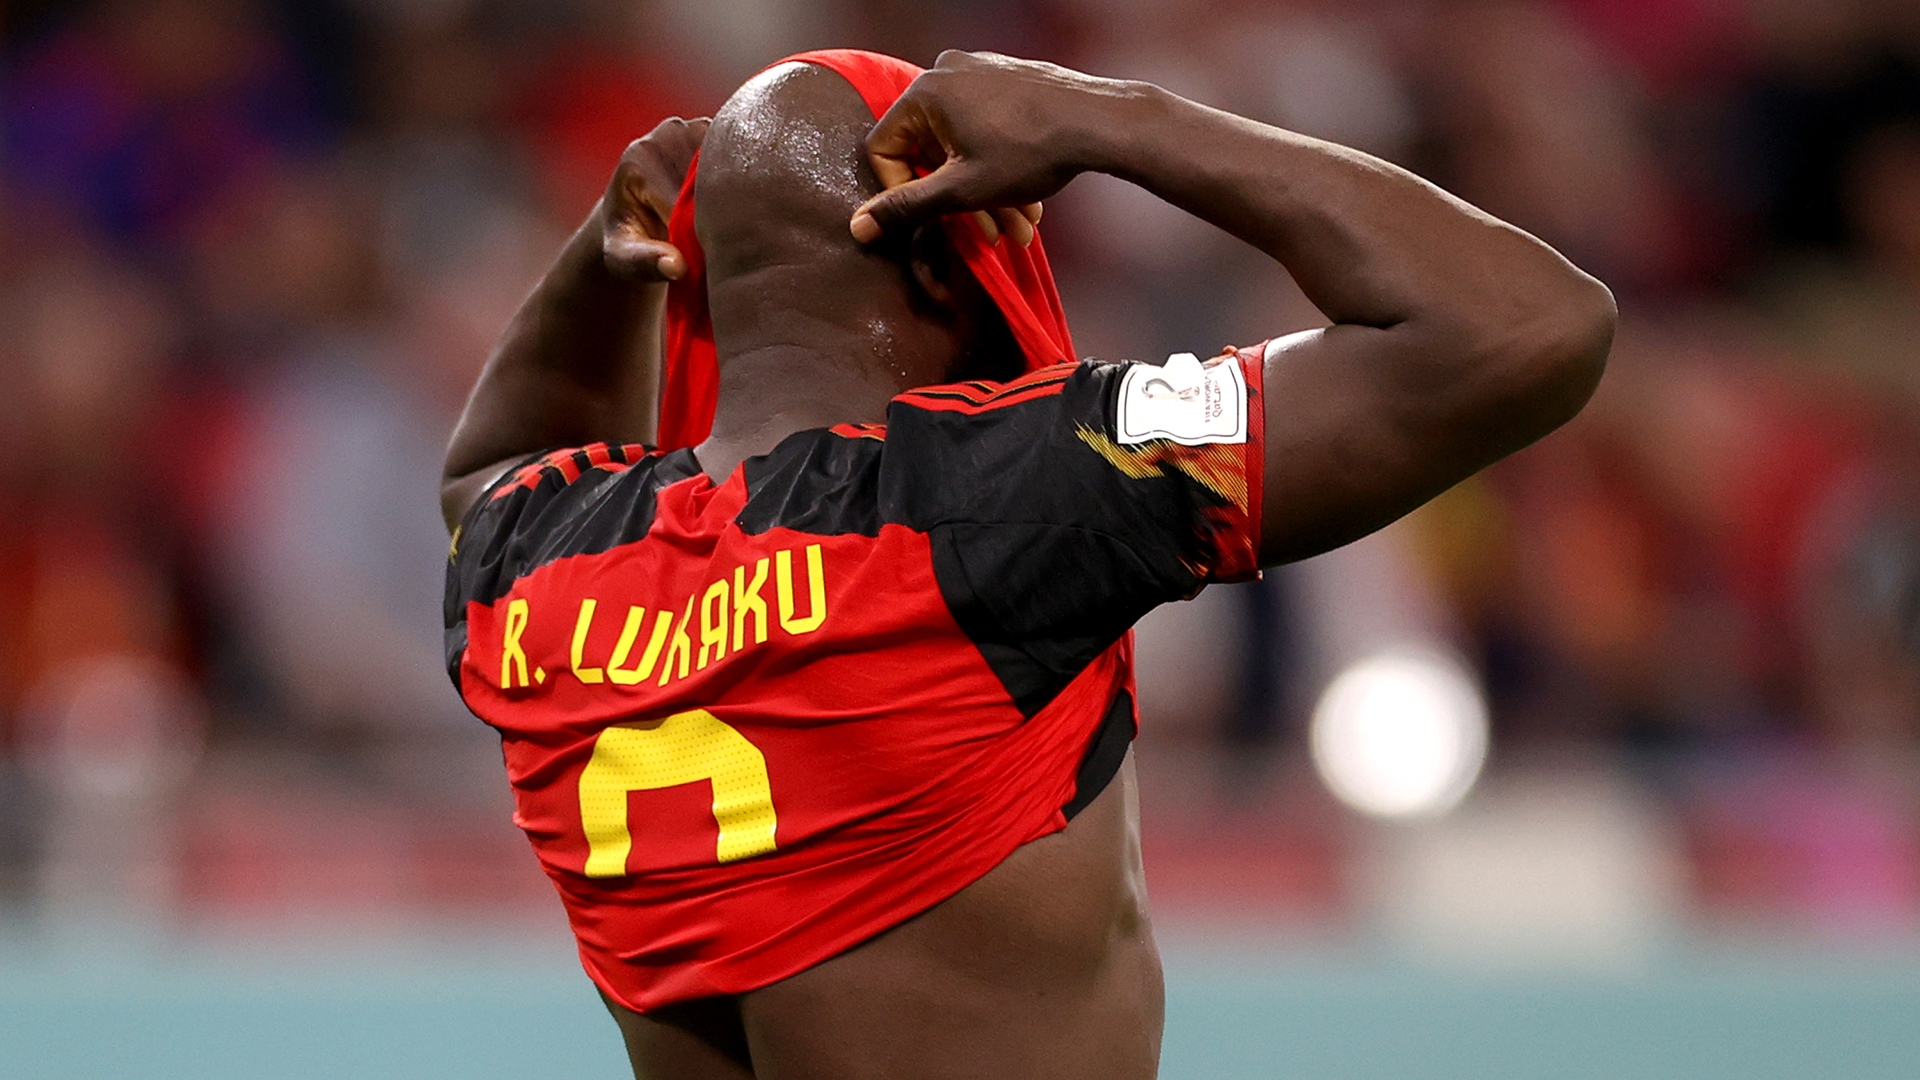 “We can't put blame on Lukaku for World Cup exit”